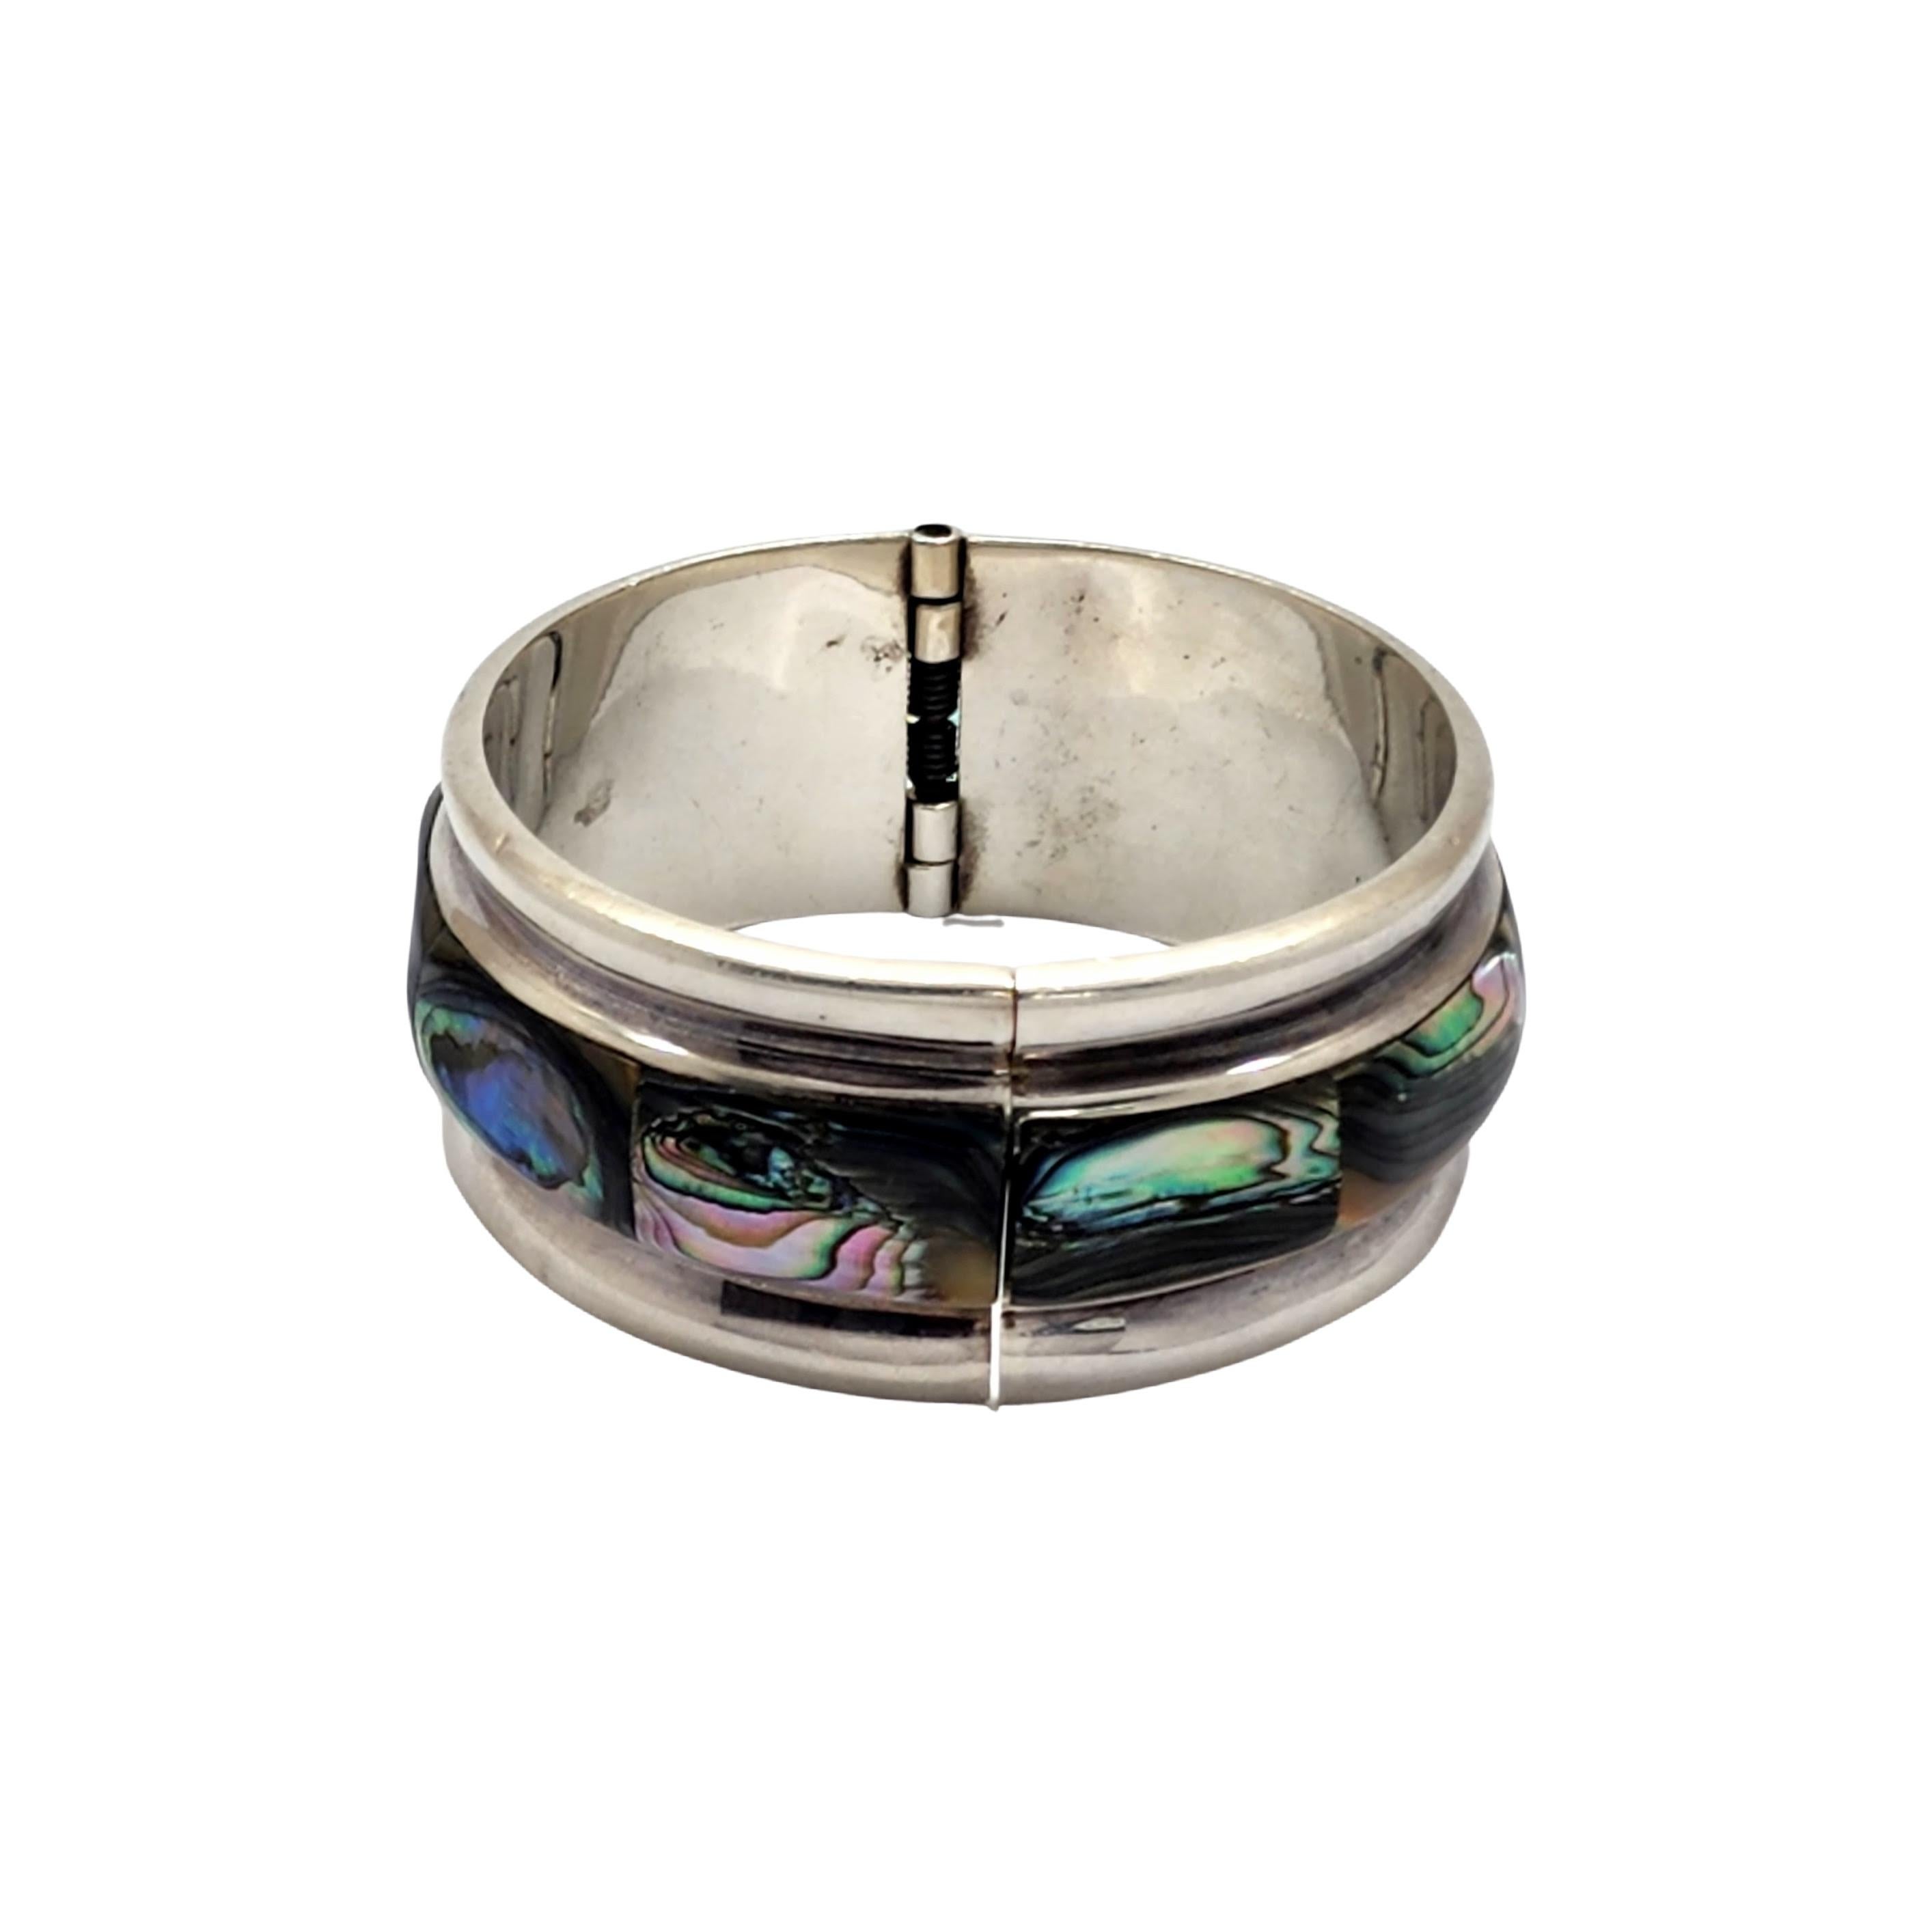 Taxco Mexico sterling silver and abalone hinged bangle bracelet by artisan TA-164.

Beautiful wide bangle featuring rectangular abalone stones at the center. Hinged at back.

Measures approx 7 1/2